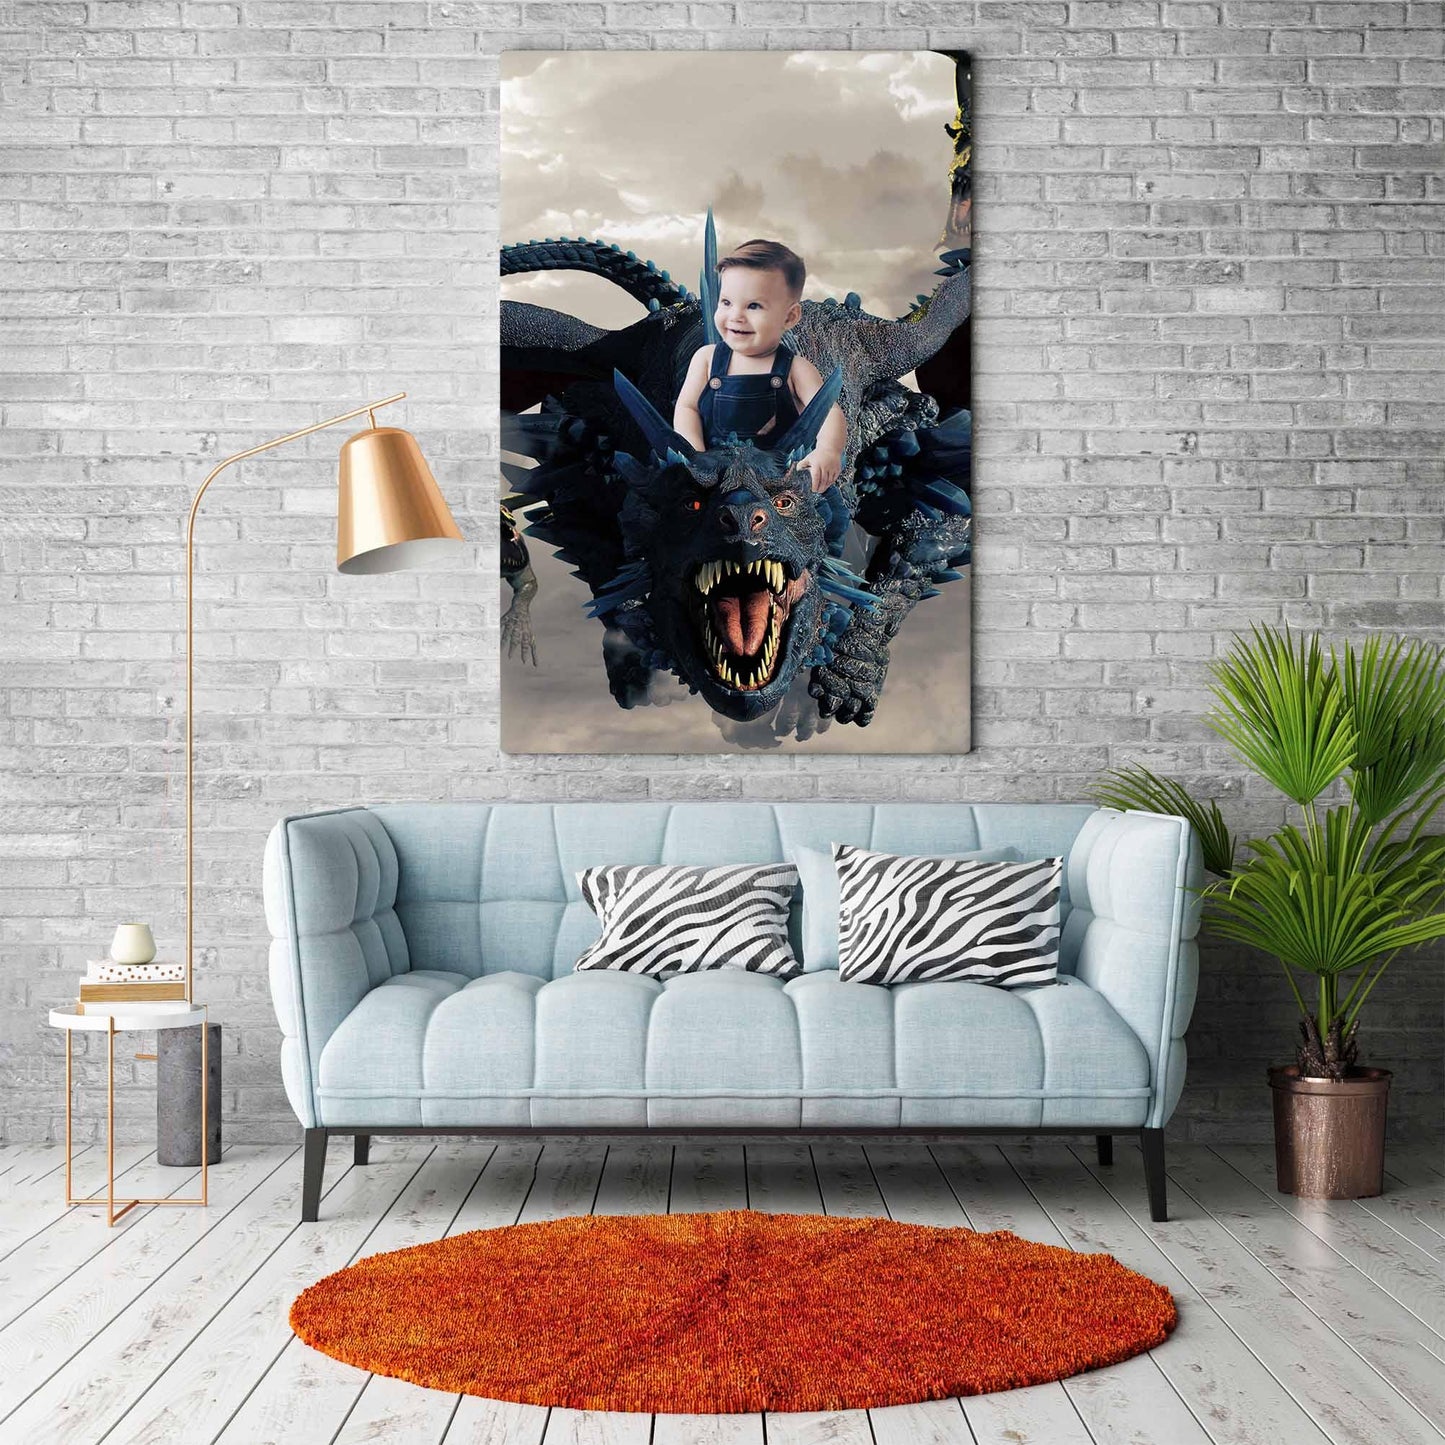 Example of Flying Dragon portrait in living room